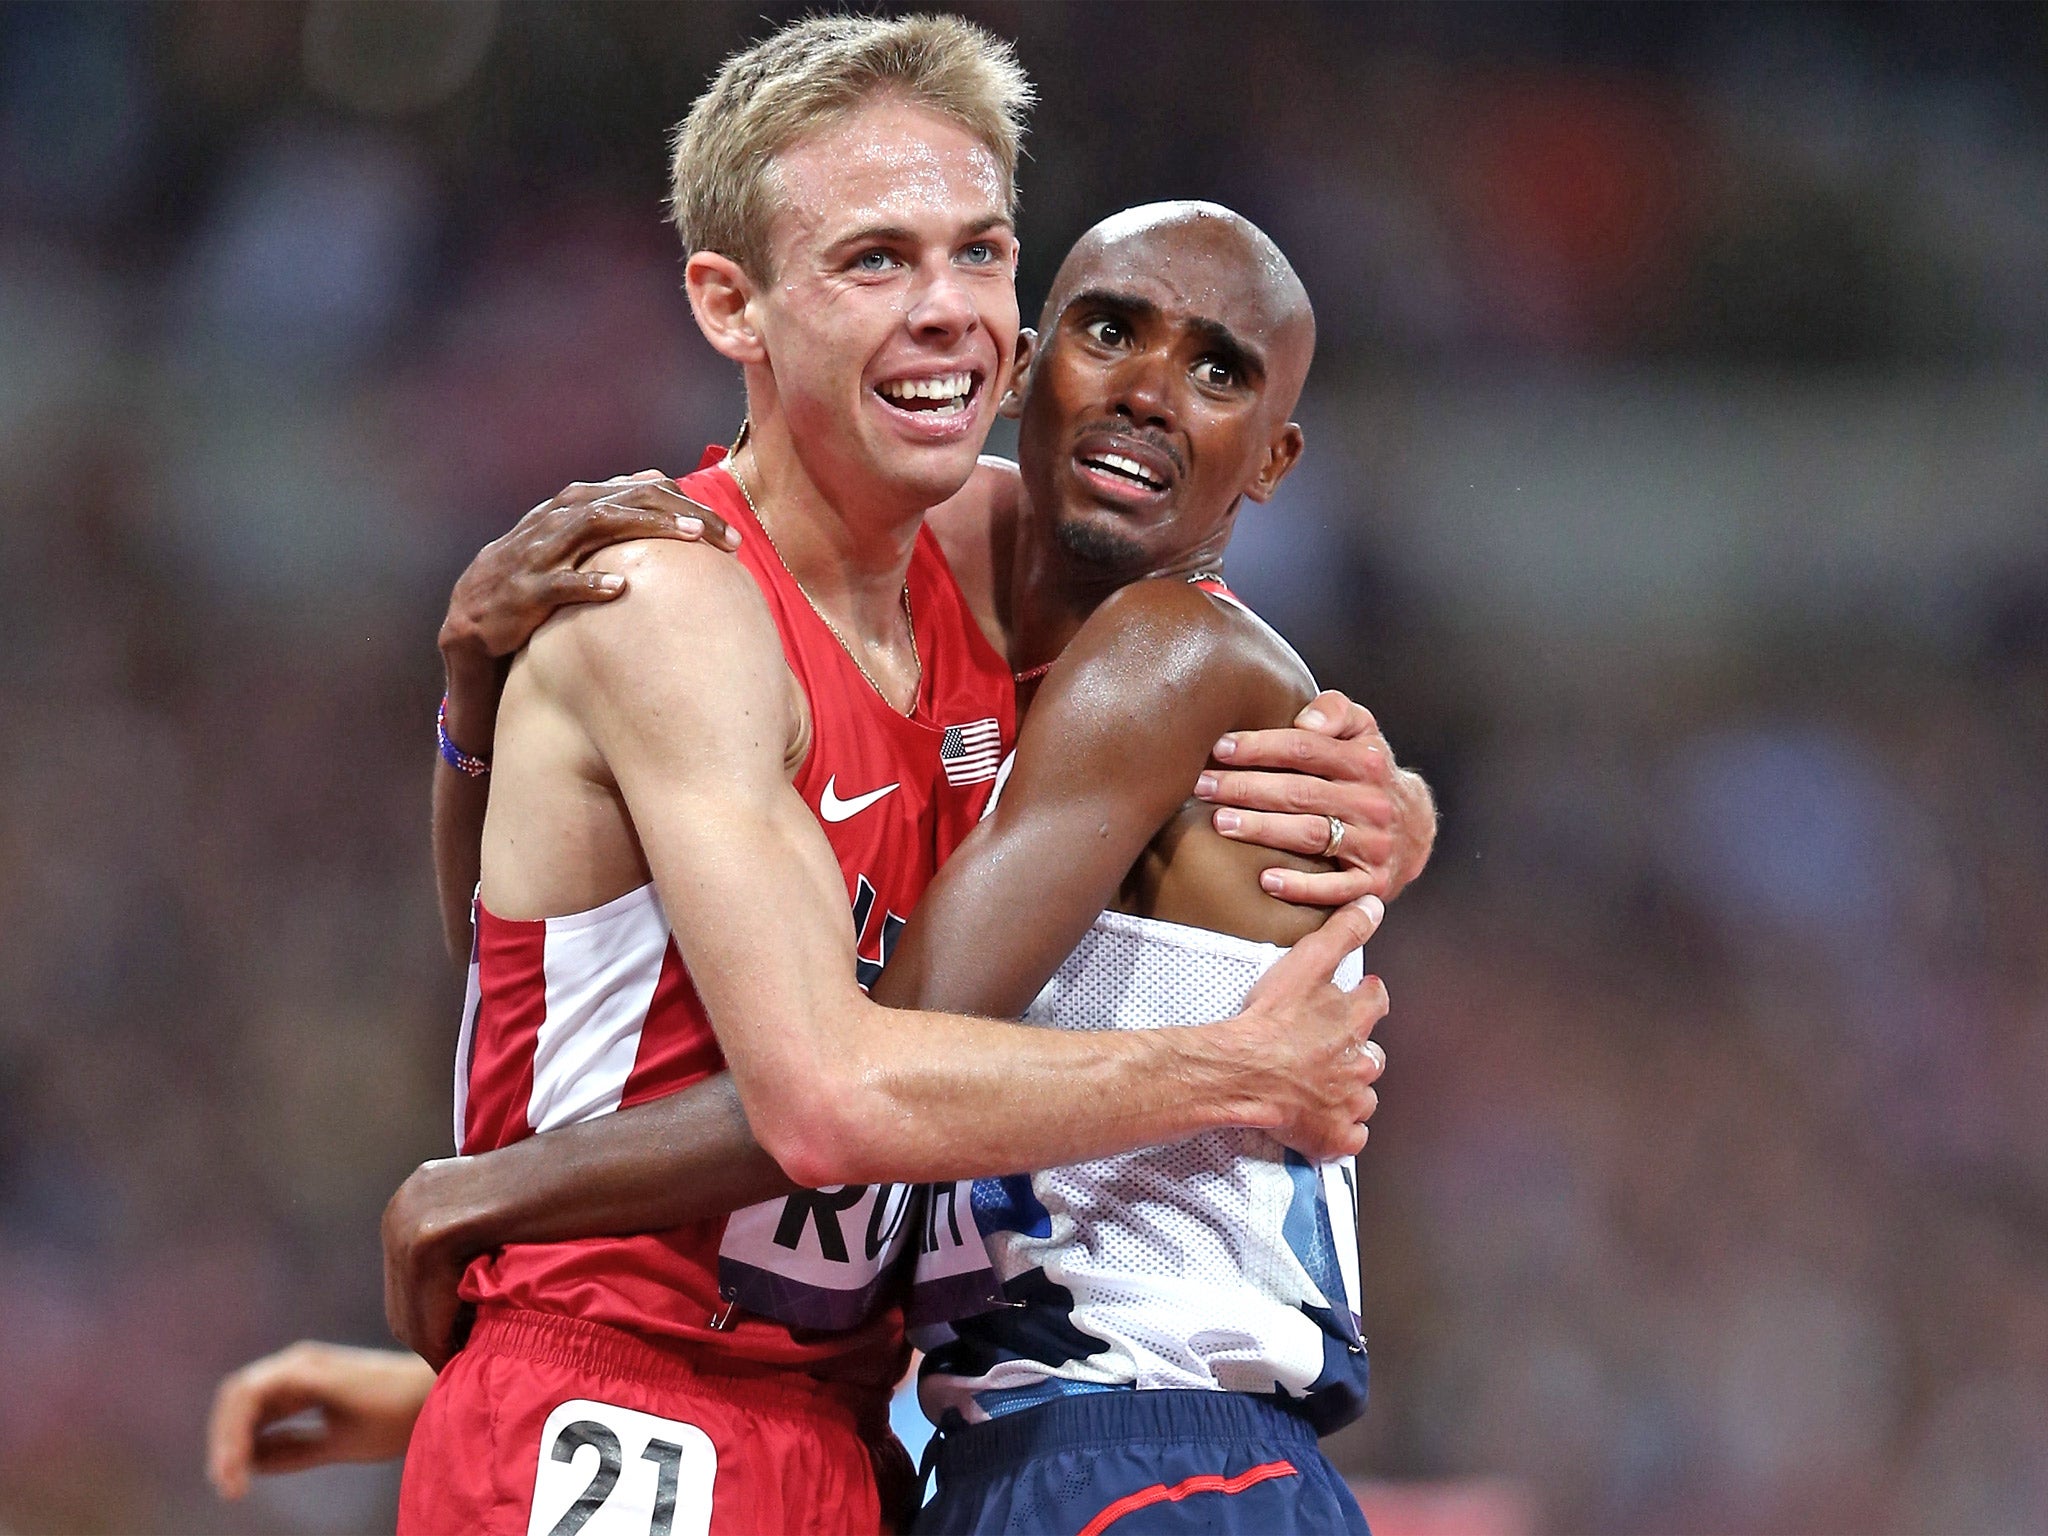 Rupp and Farah after the Olympic Men's 10,000m Final